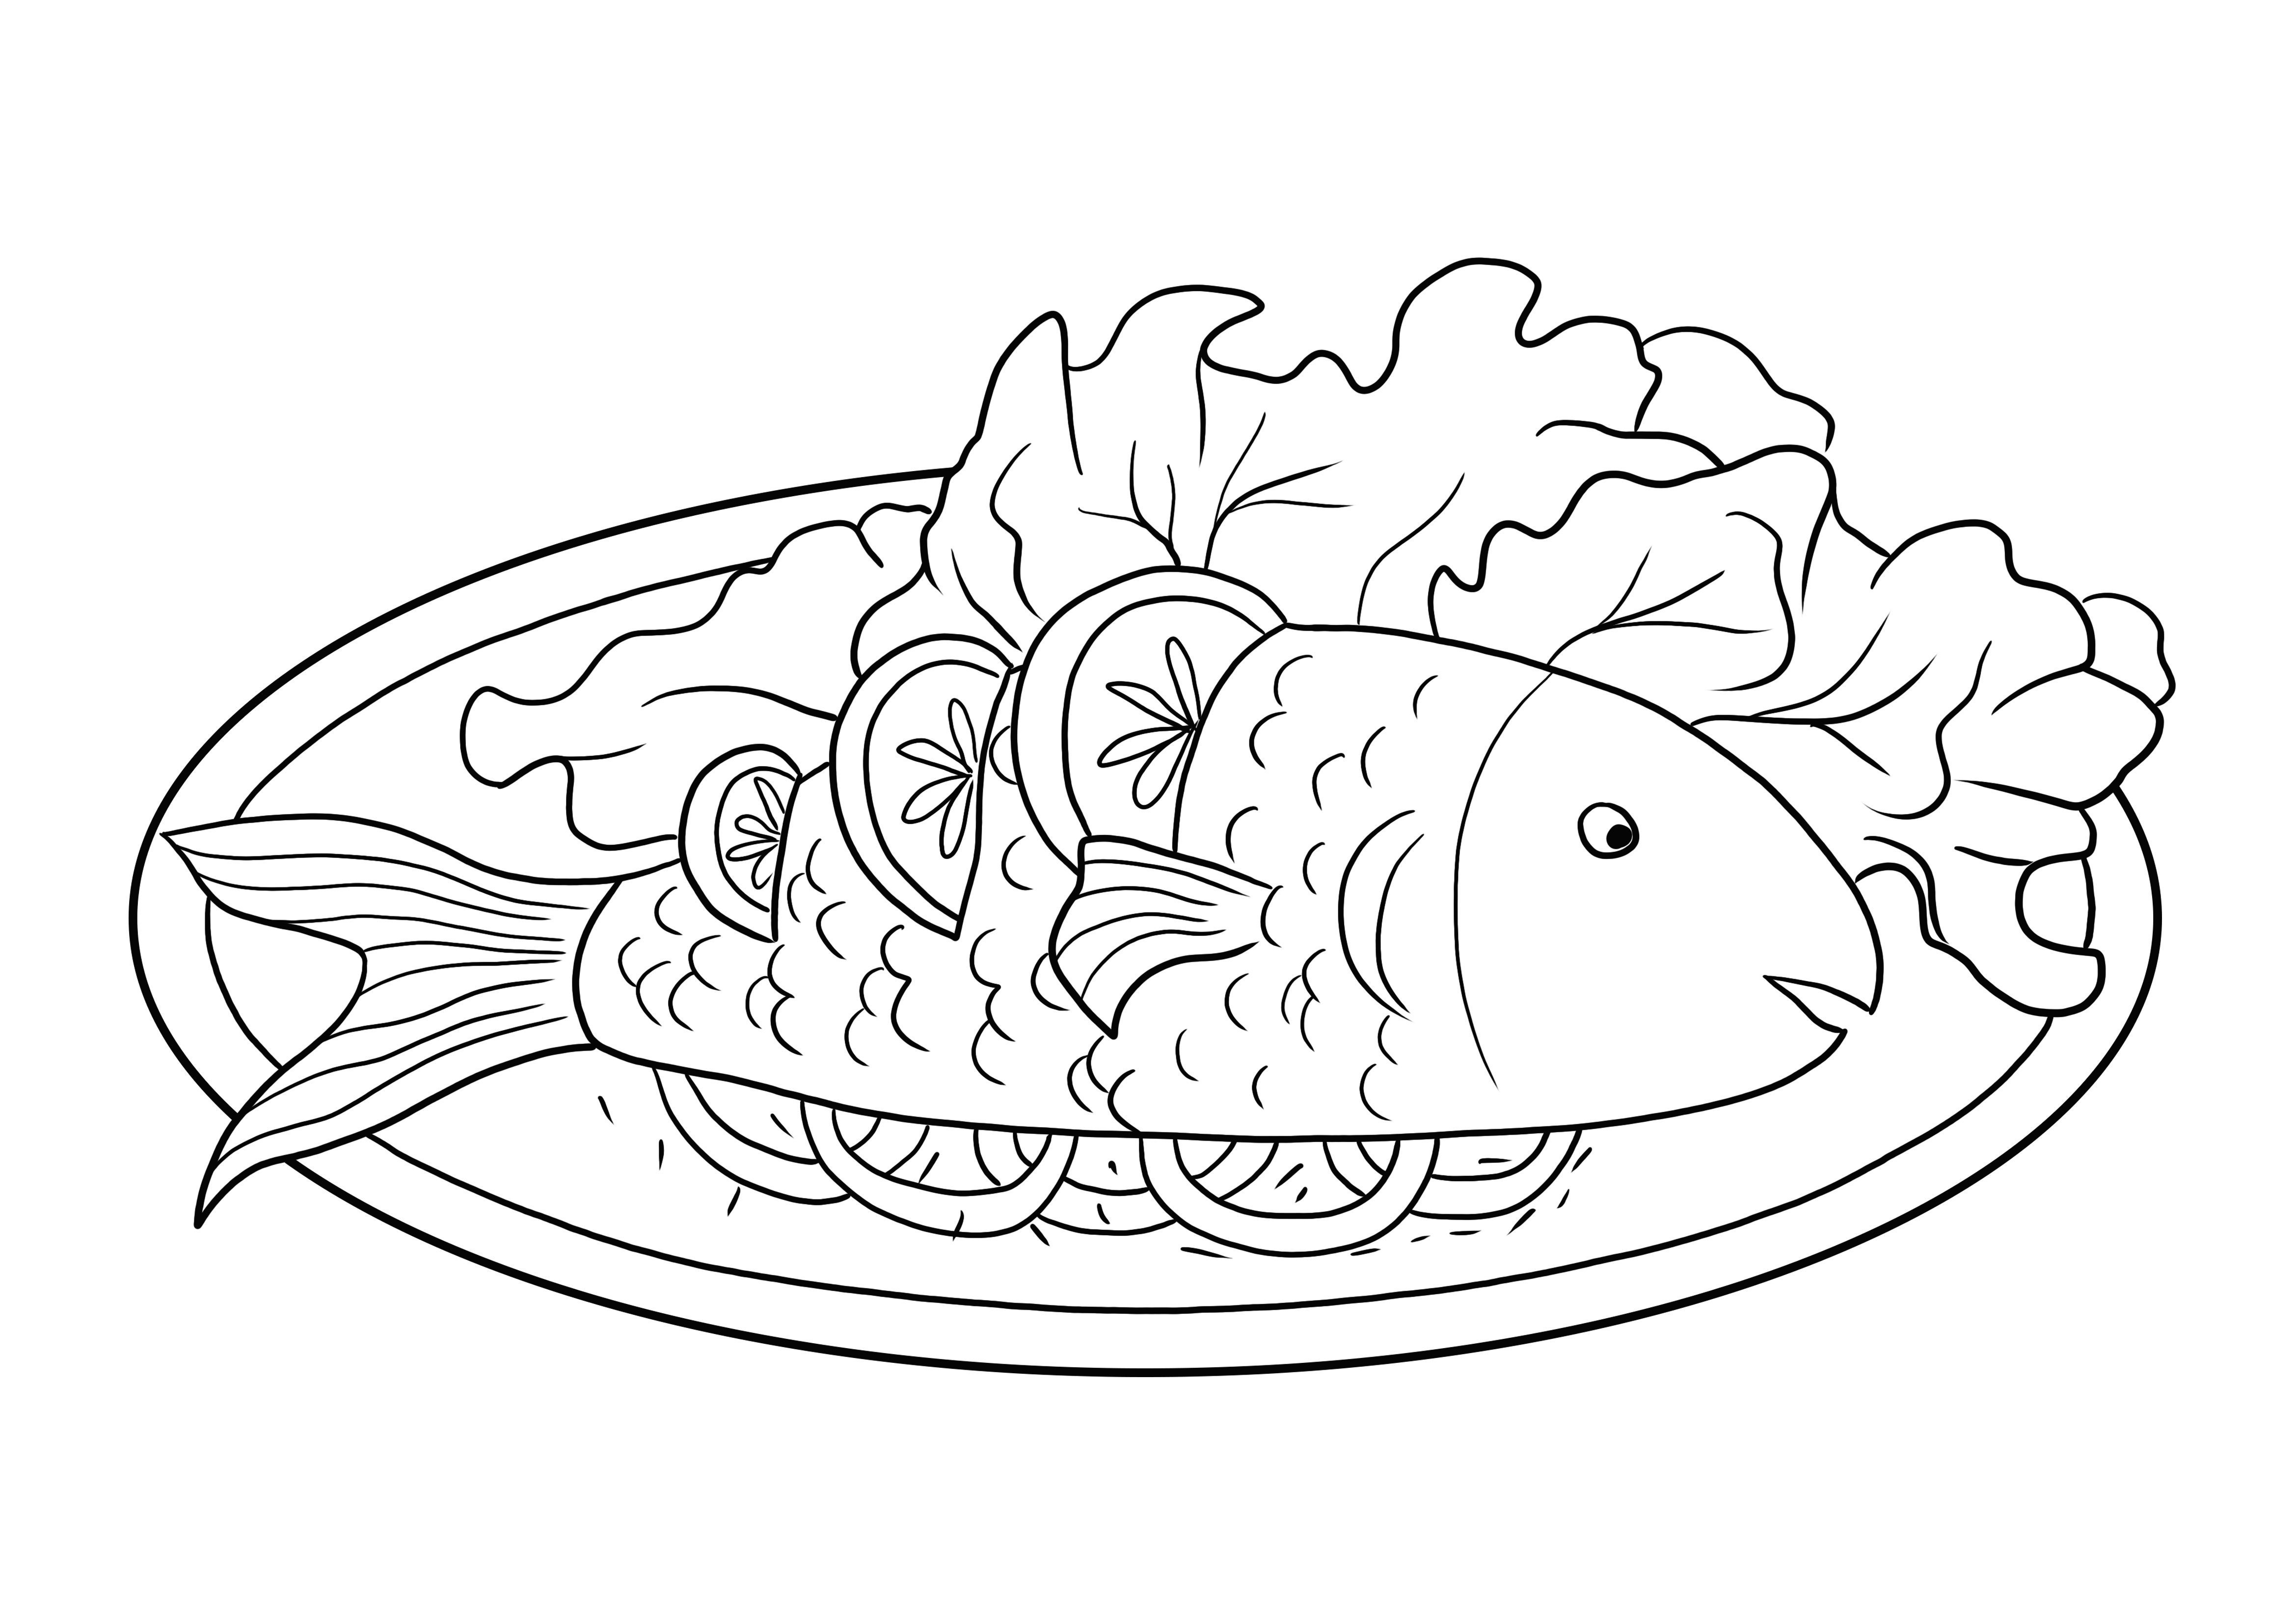 Cooked fish with lemon-easy coloring for kids to learn to color